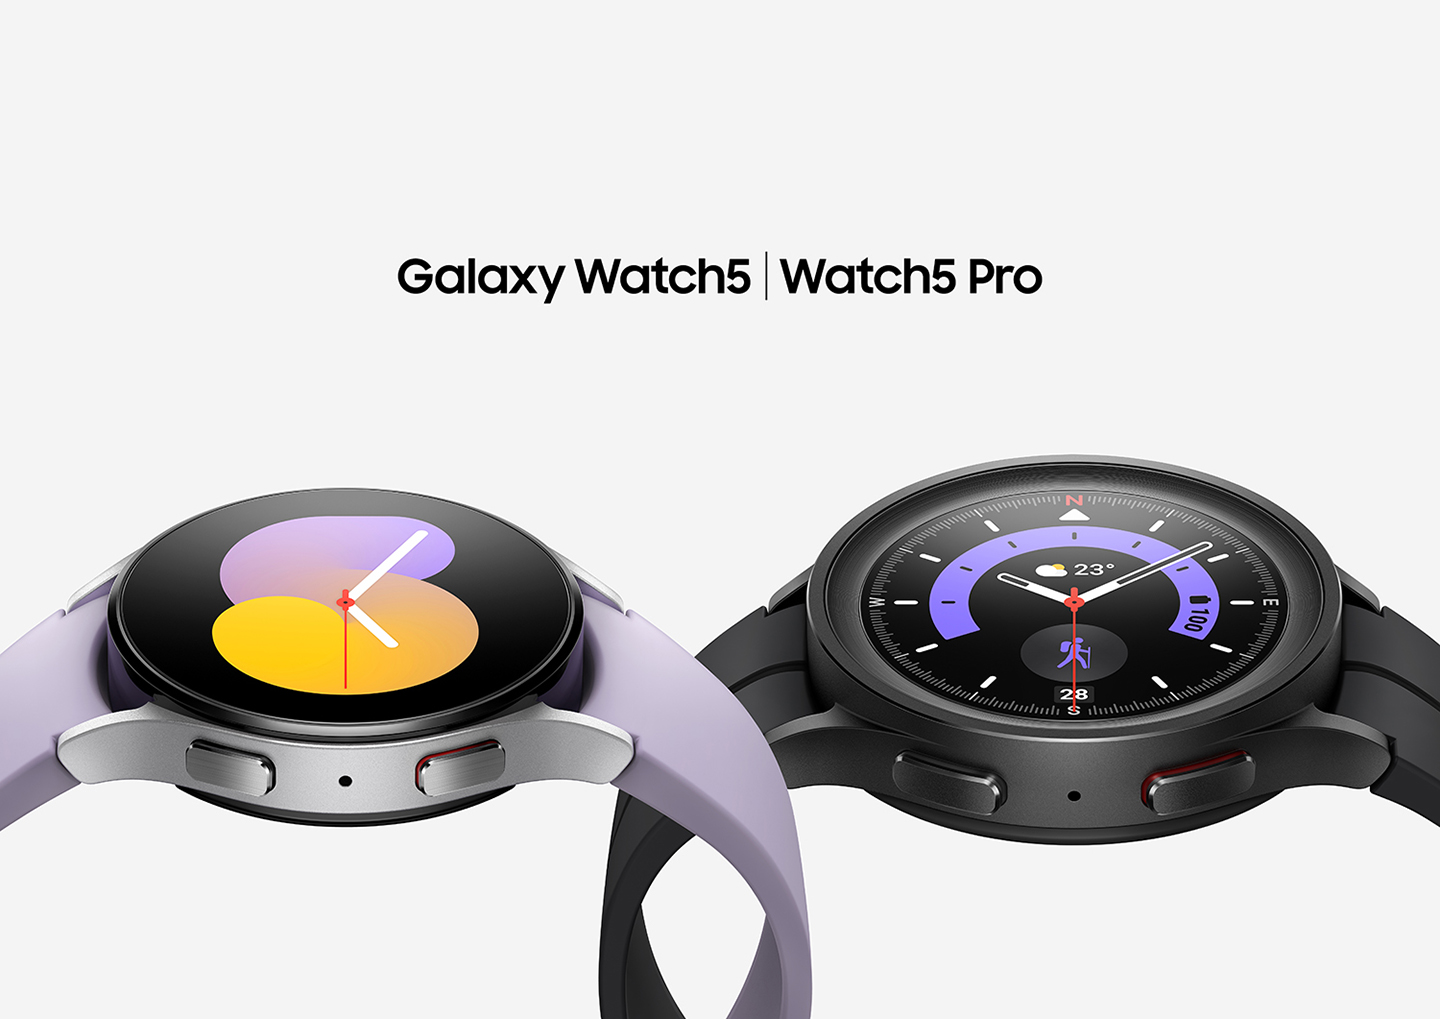 Samsung Leads Holistic Health Innovation With Galaxy Watch5 And Galaxy Watch5 Pro Samsung Mobile Press